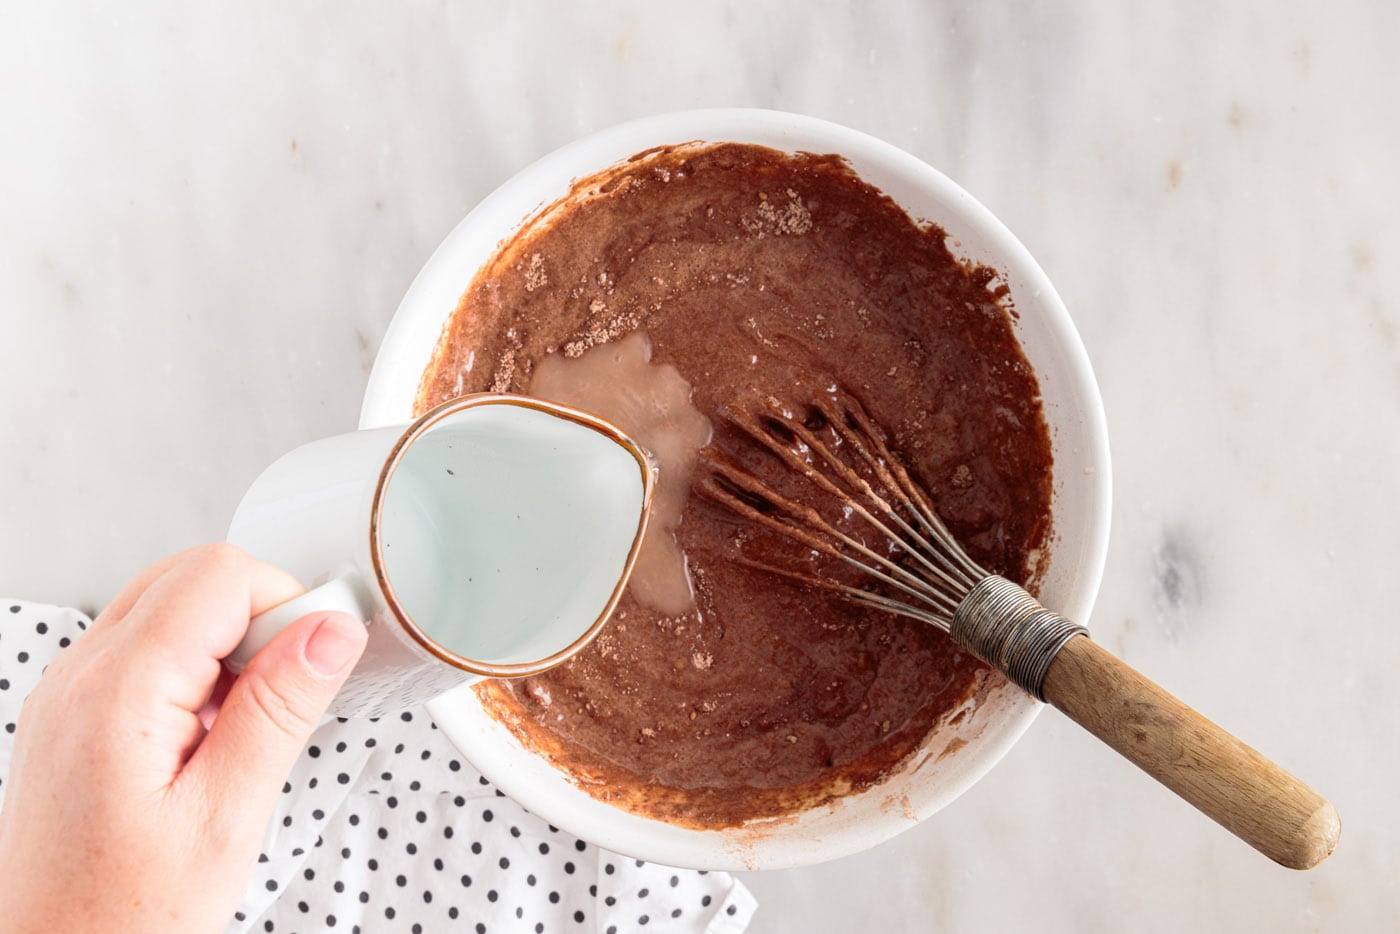 adding hot water to chocolate cake batter in a bowl